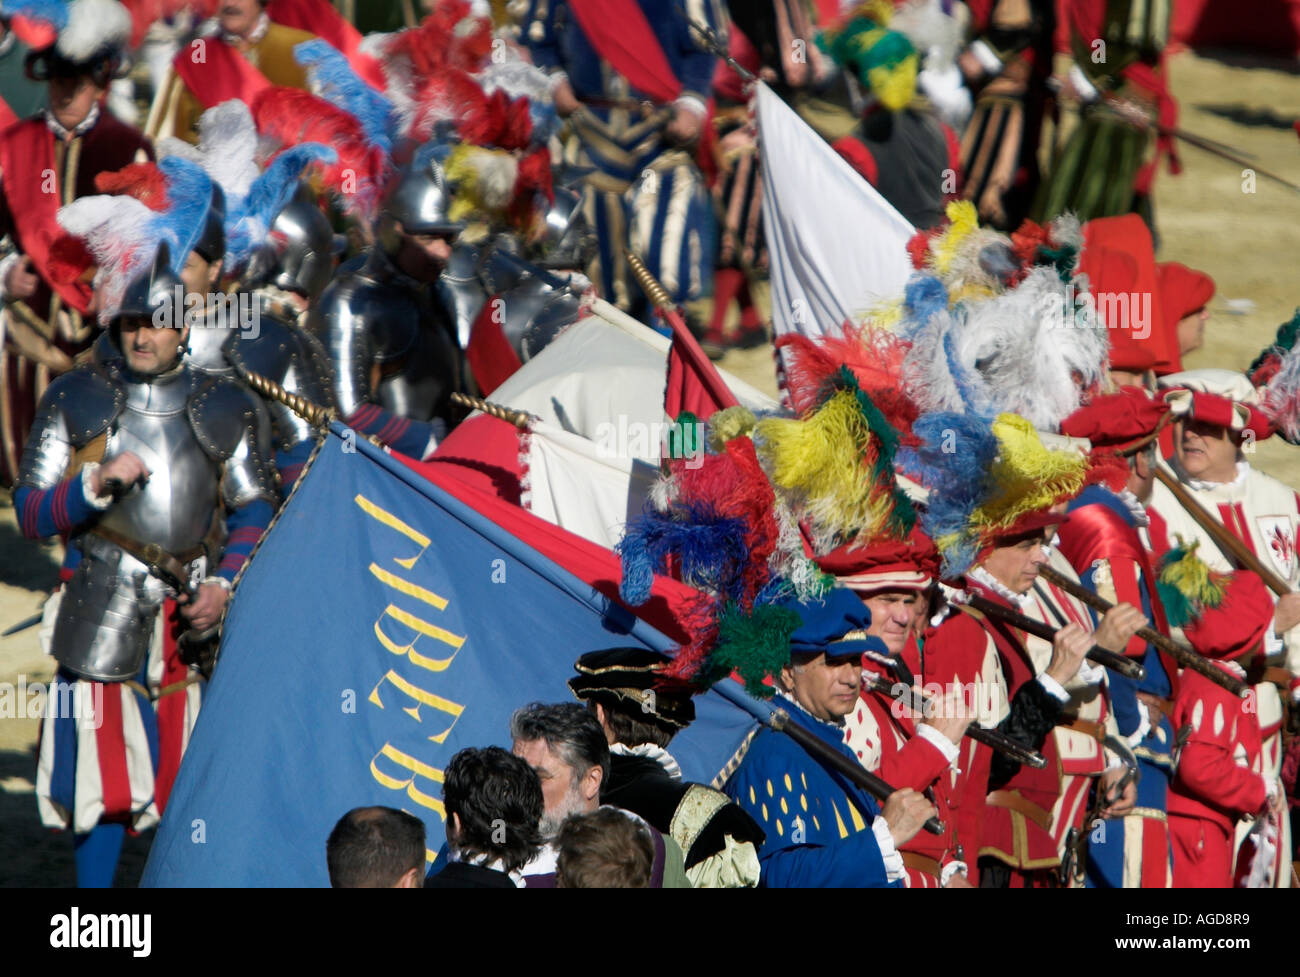 The colourful parade of the Calcio Storico in the Piazza Santa Croce, an anual event in Florence, Italy. Stock Photo